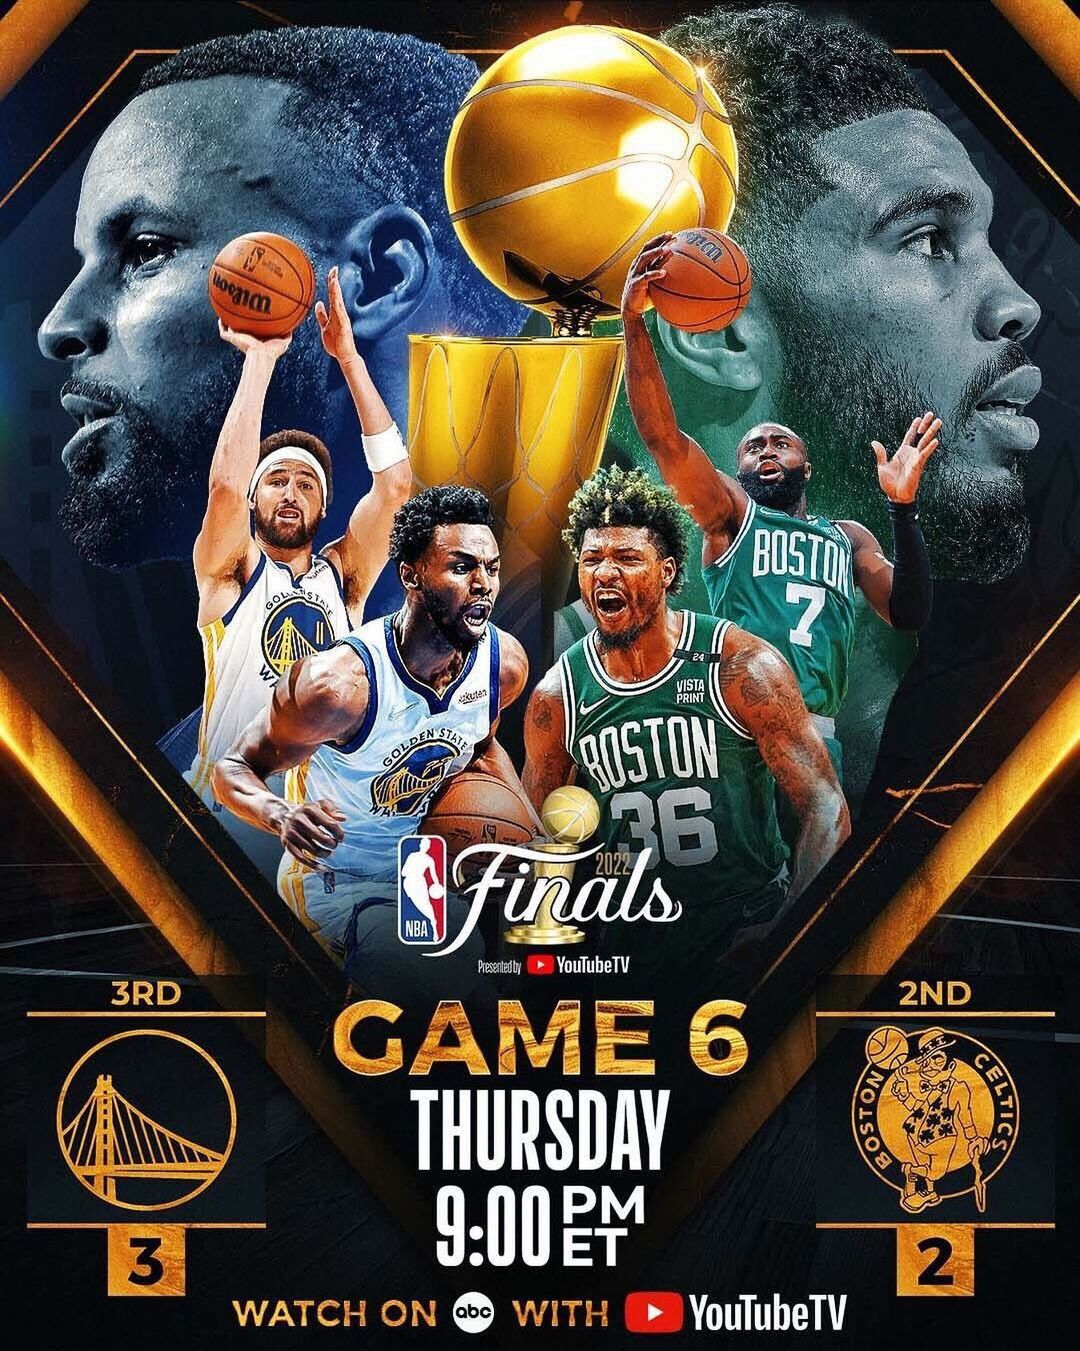 Back to Boston we go for Game 6 on Thursday!  #NBAFinals presented by YouTube ...